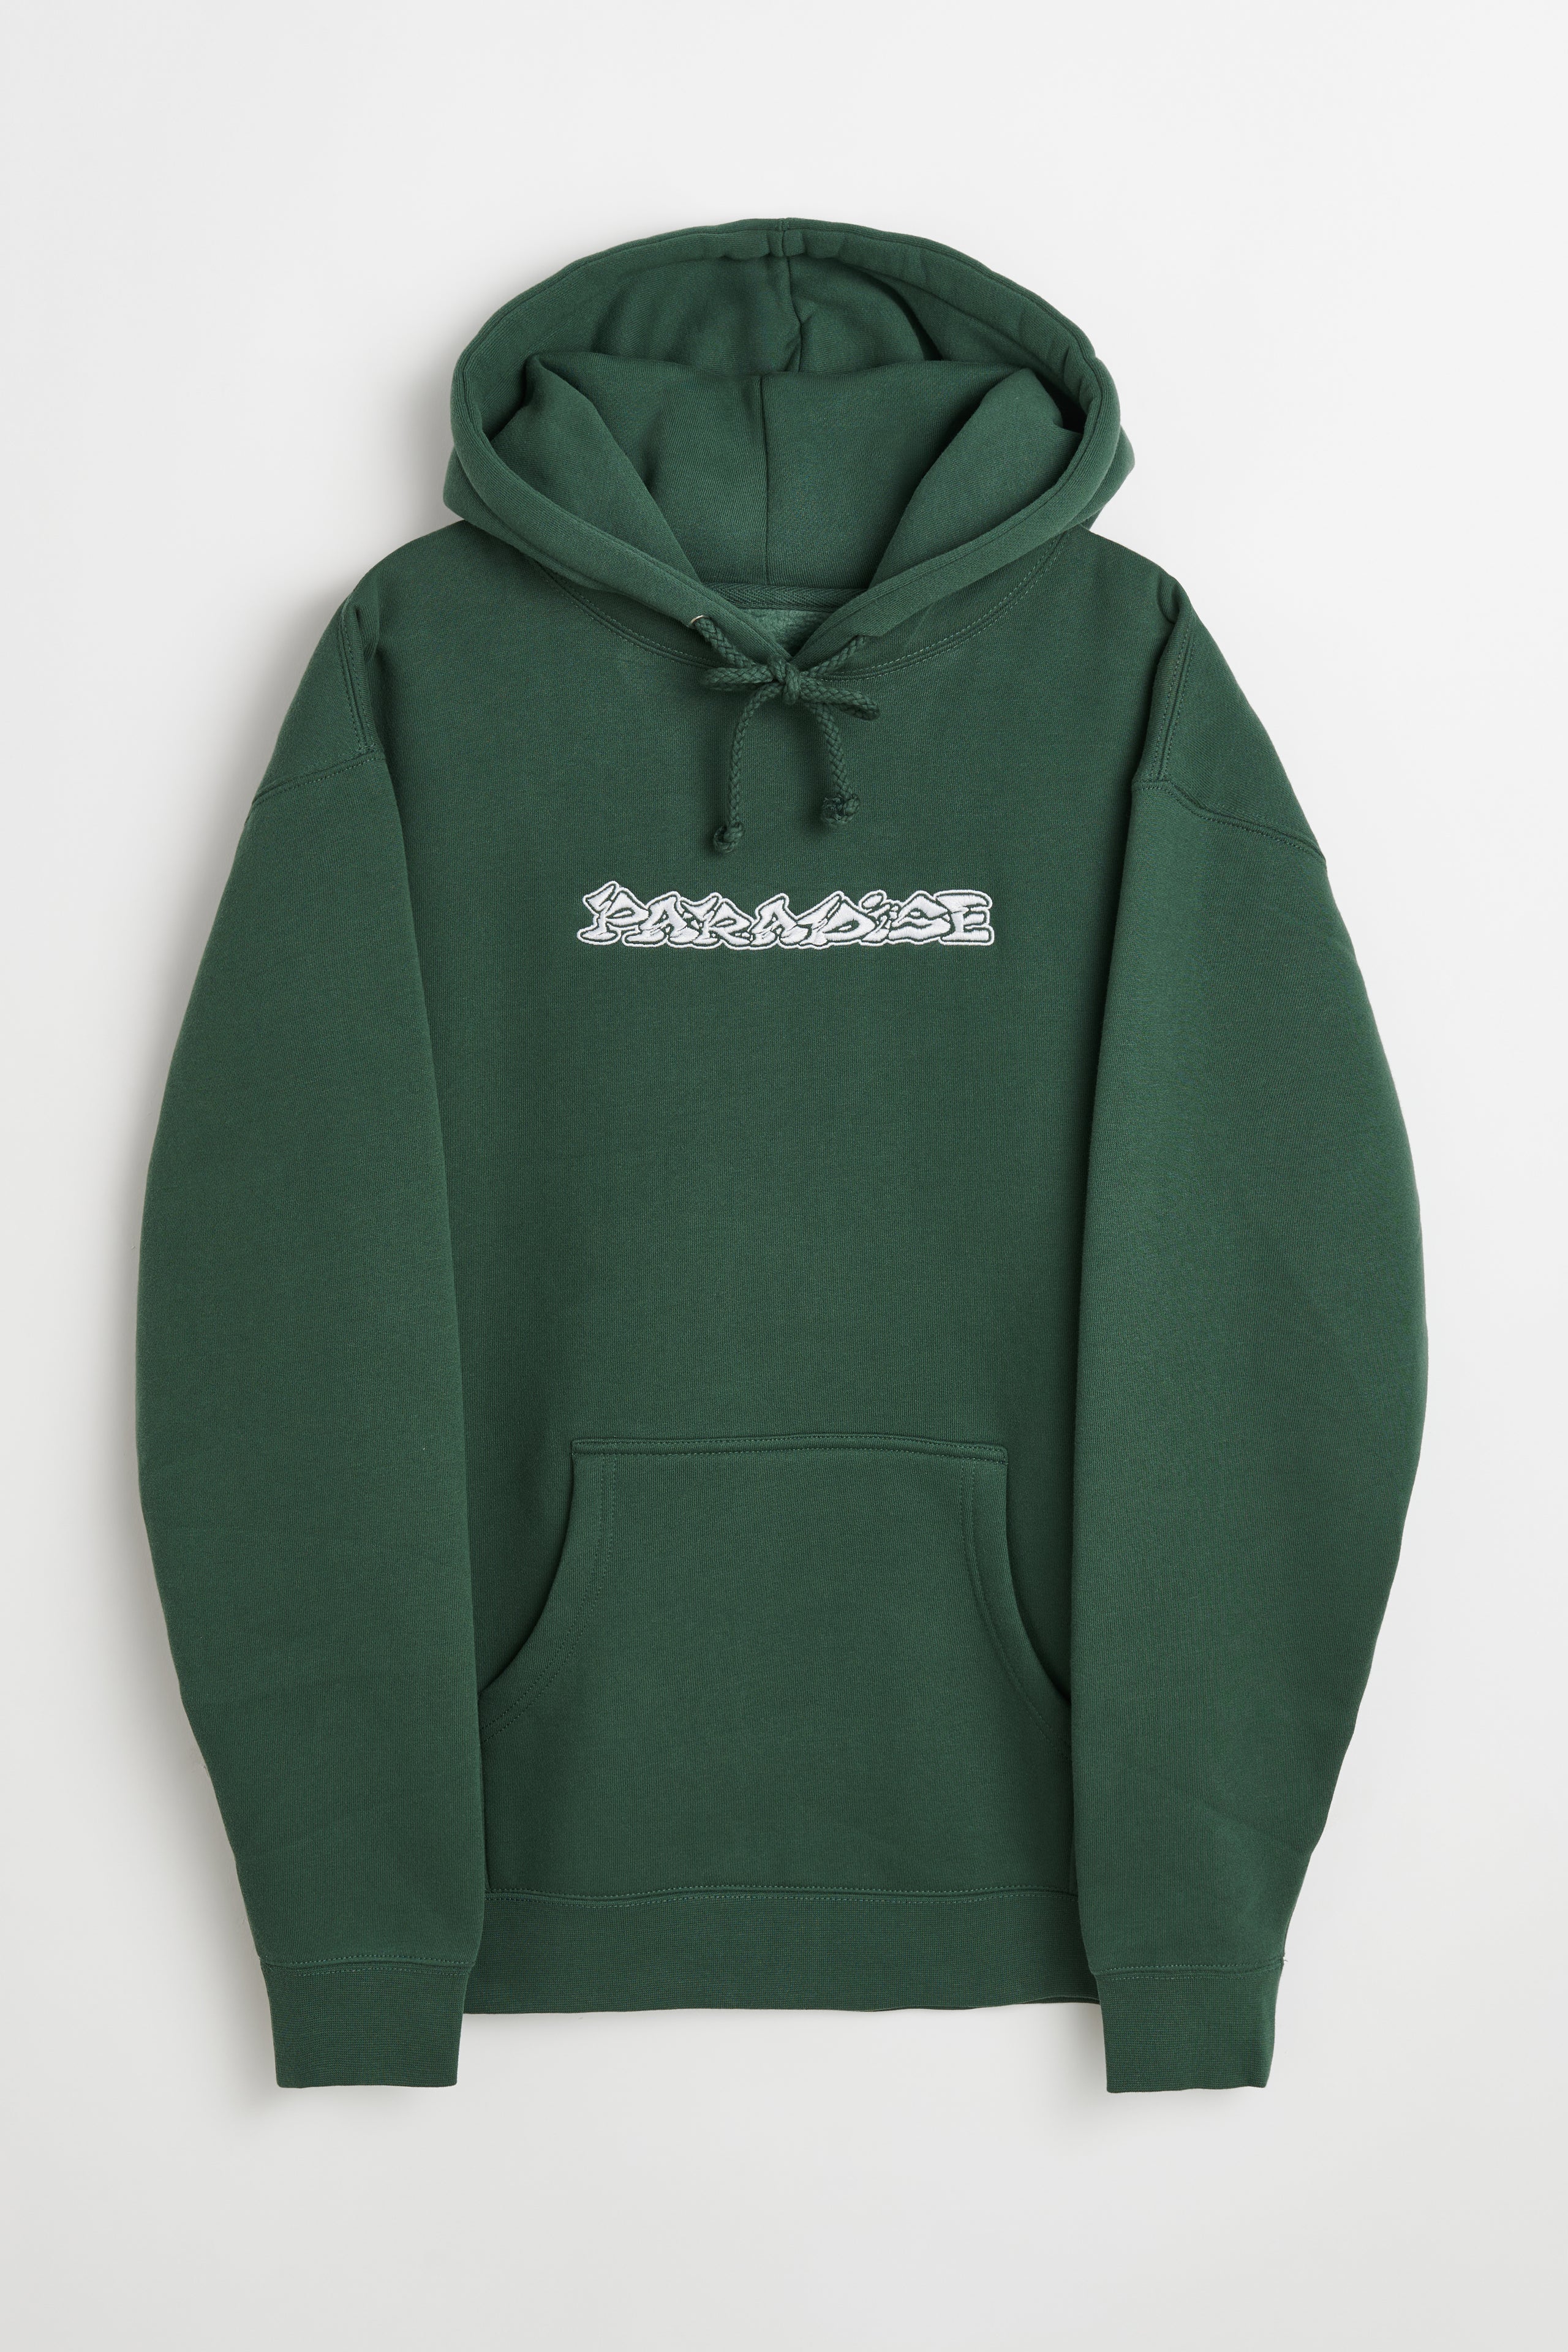 Paradise Dystopia Embroidered Hooded Sweatshirt Green